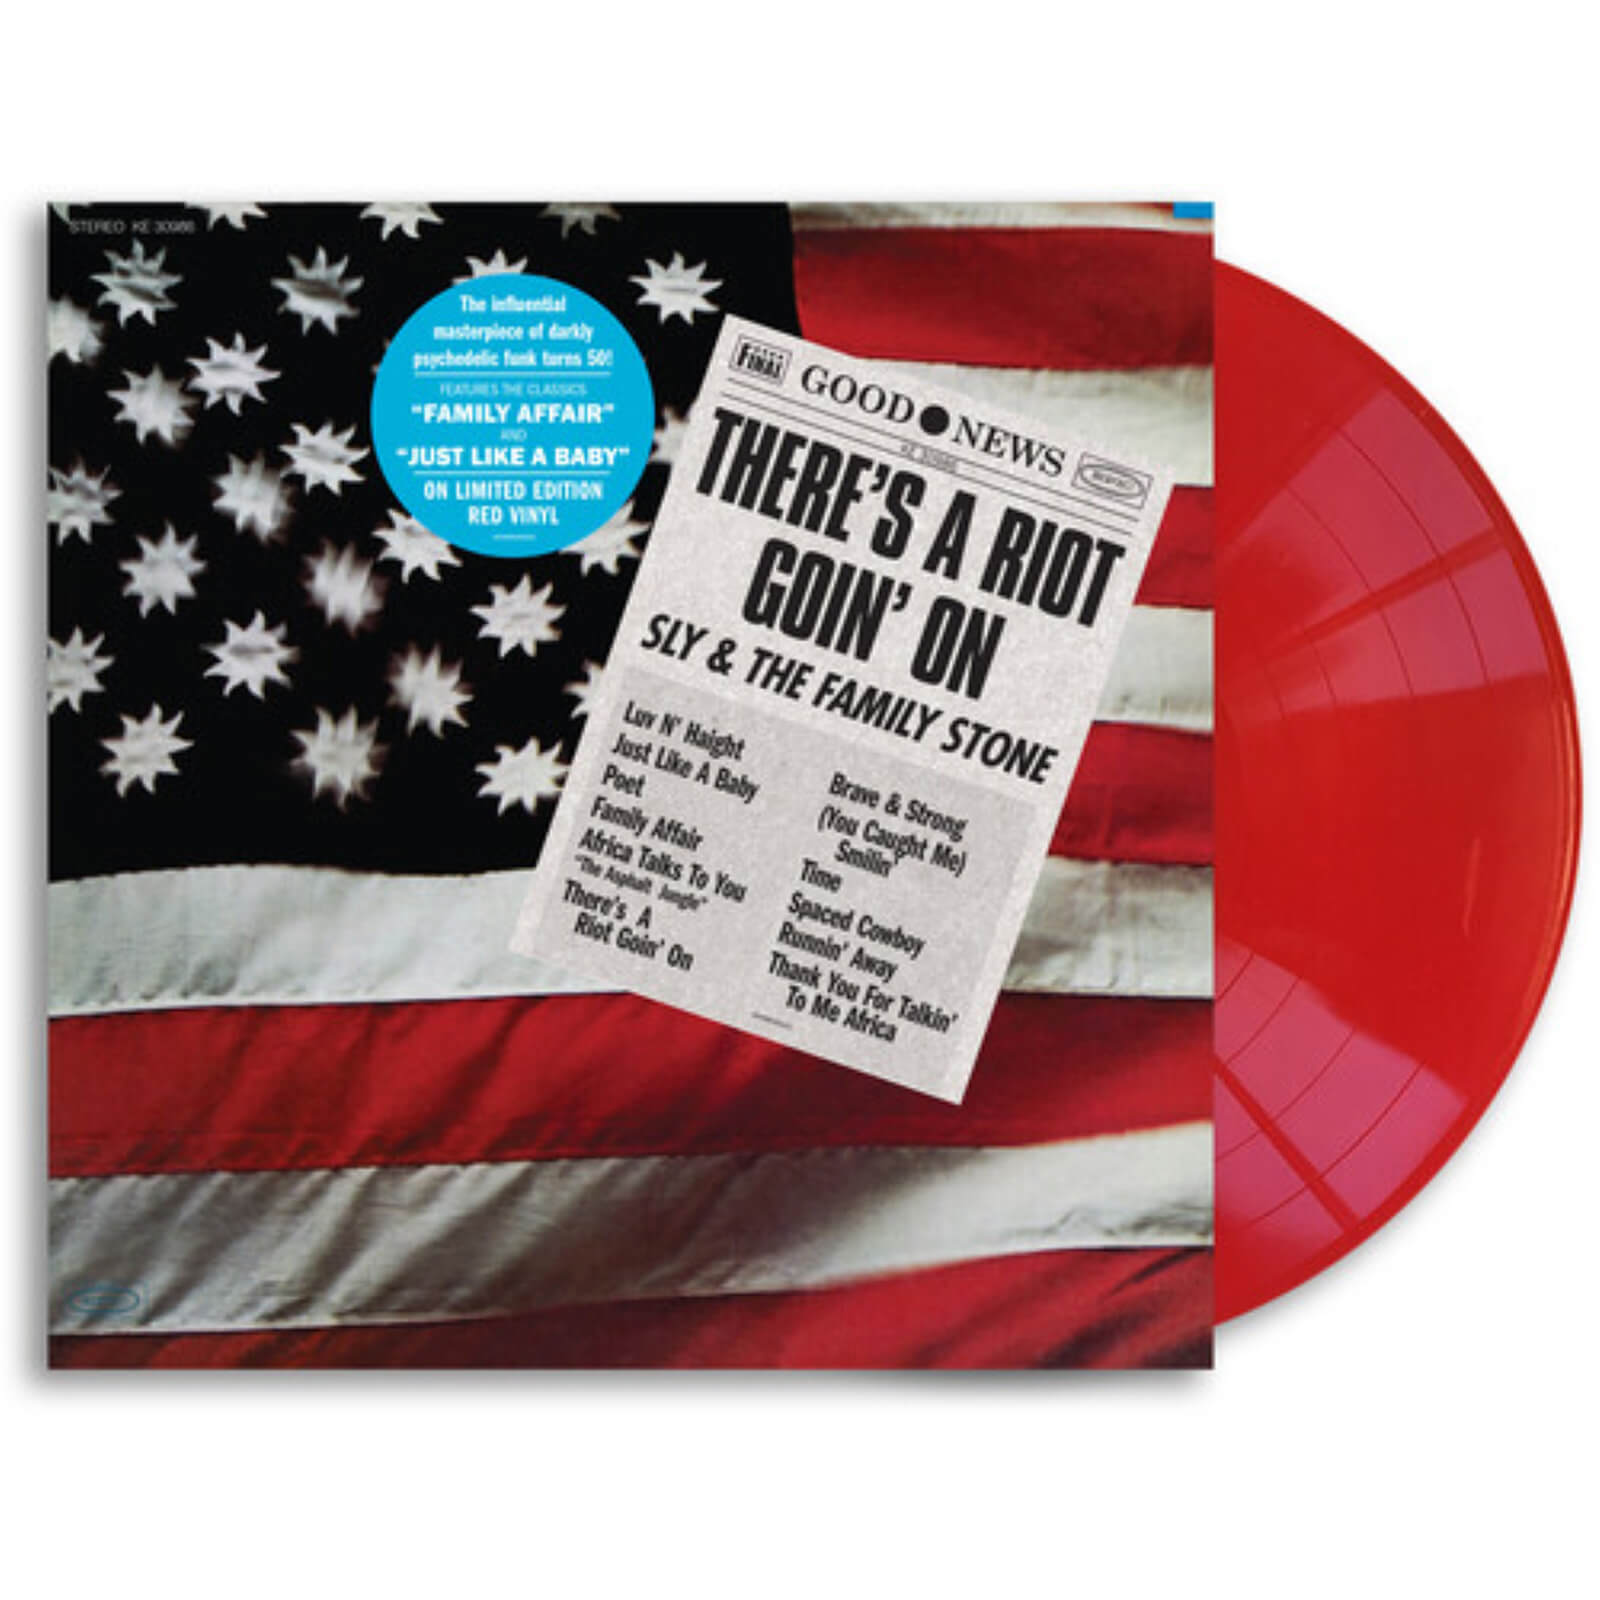 Sly & The Family Stone - There's A Riot Goin' On LP (Red)